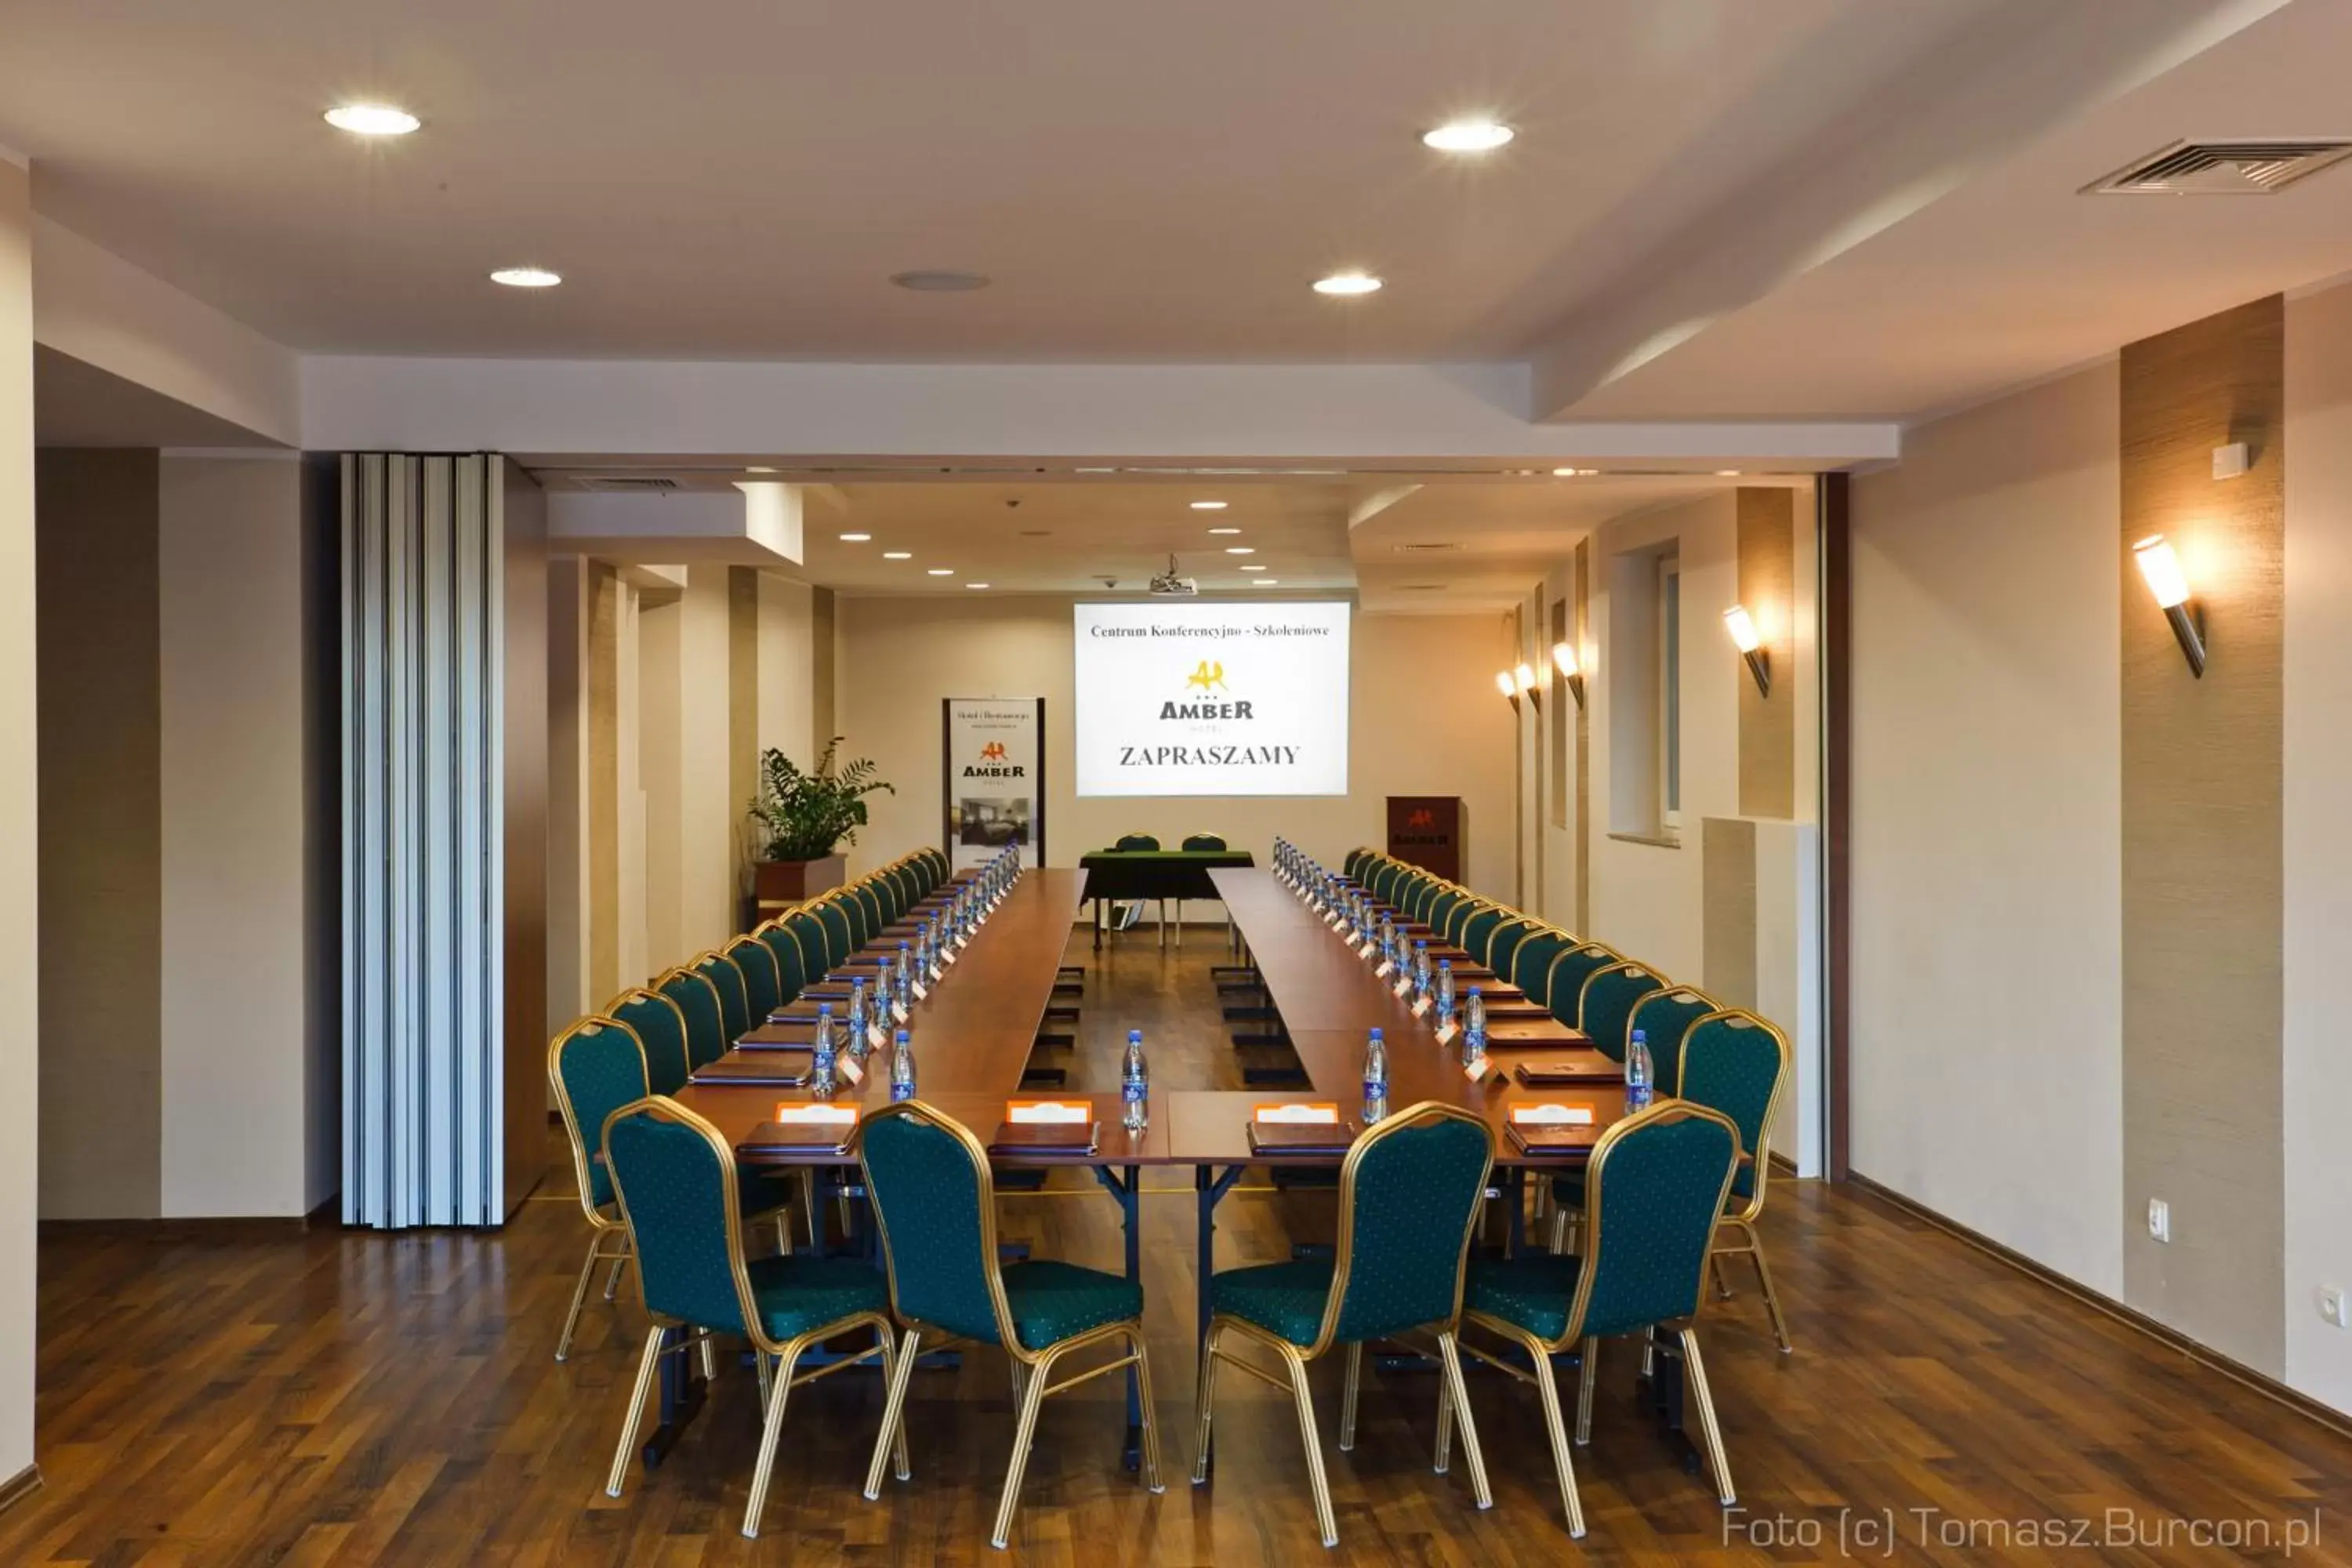 Business facilities in Amber Hotel